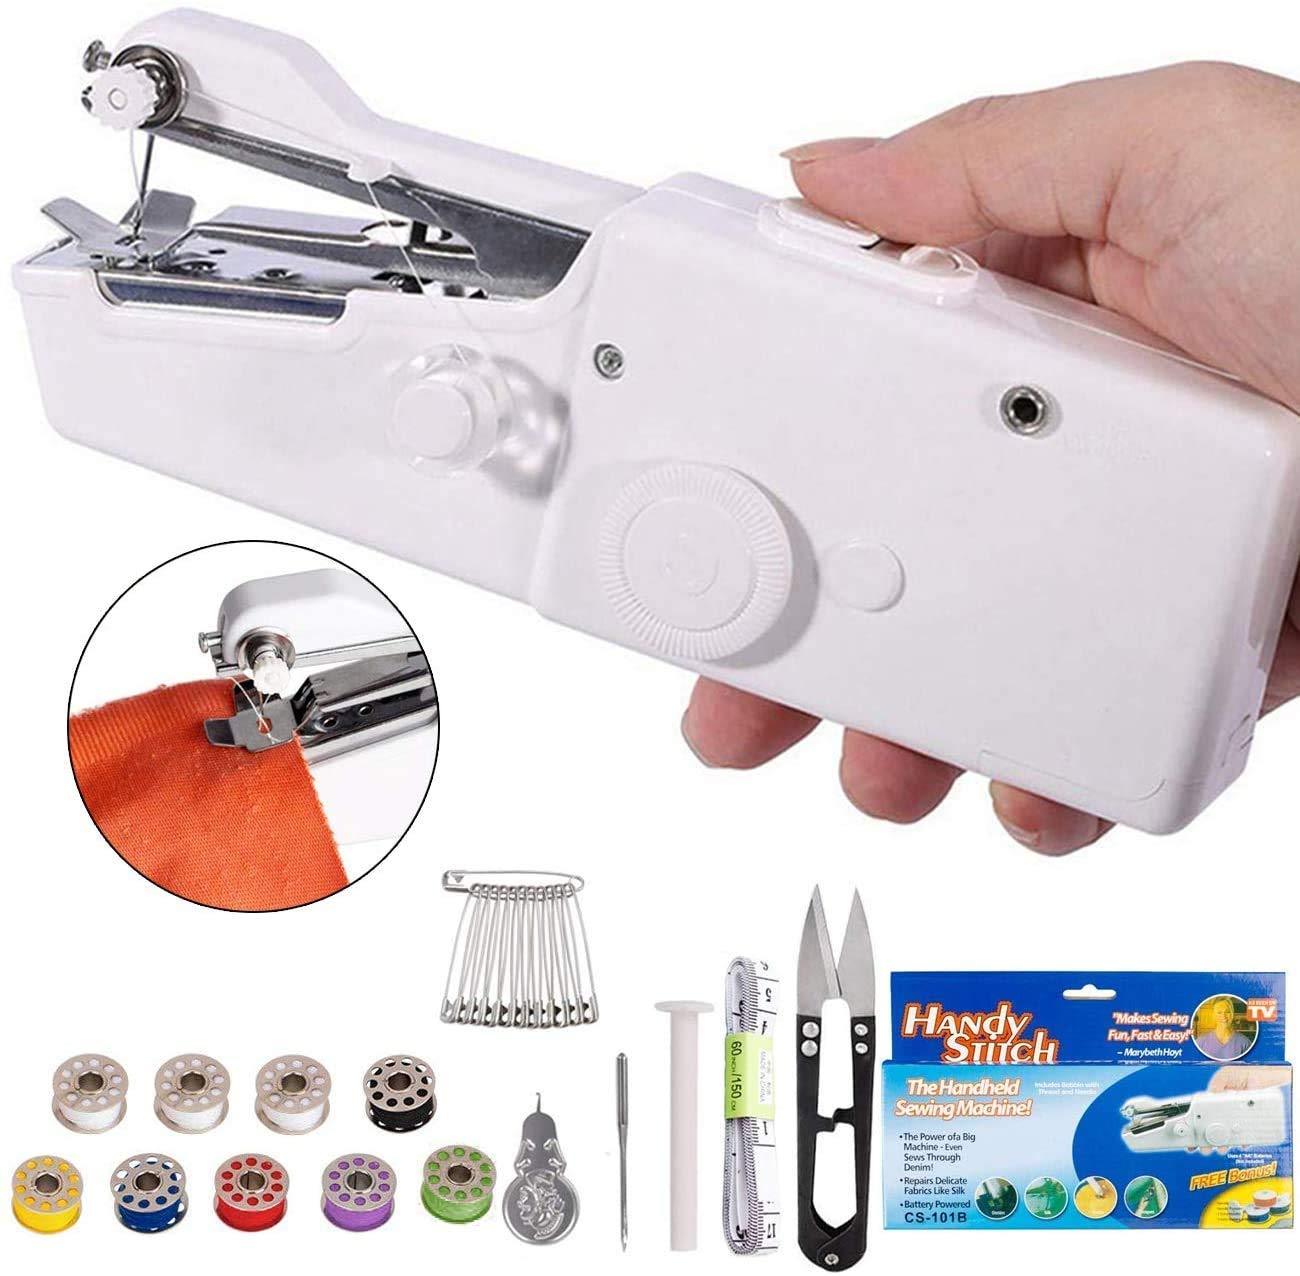 7 Best Handheld Sewing Machines For Quilters